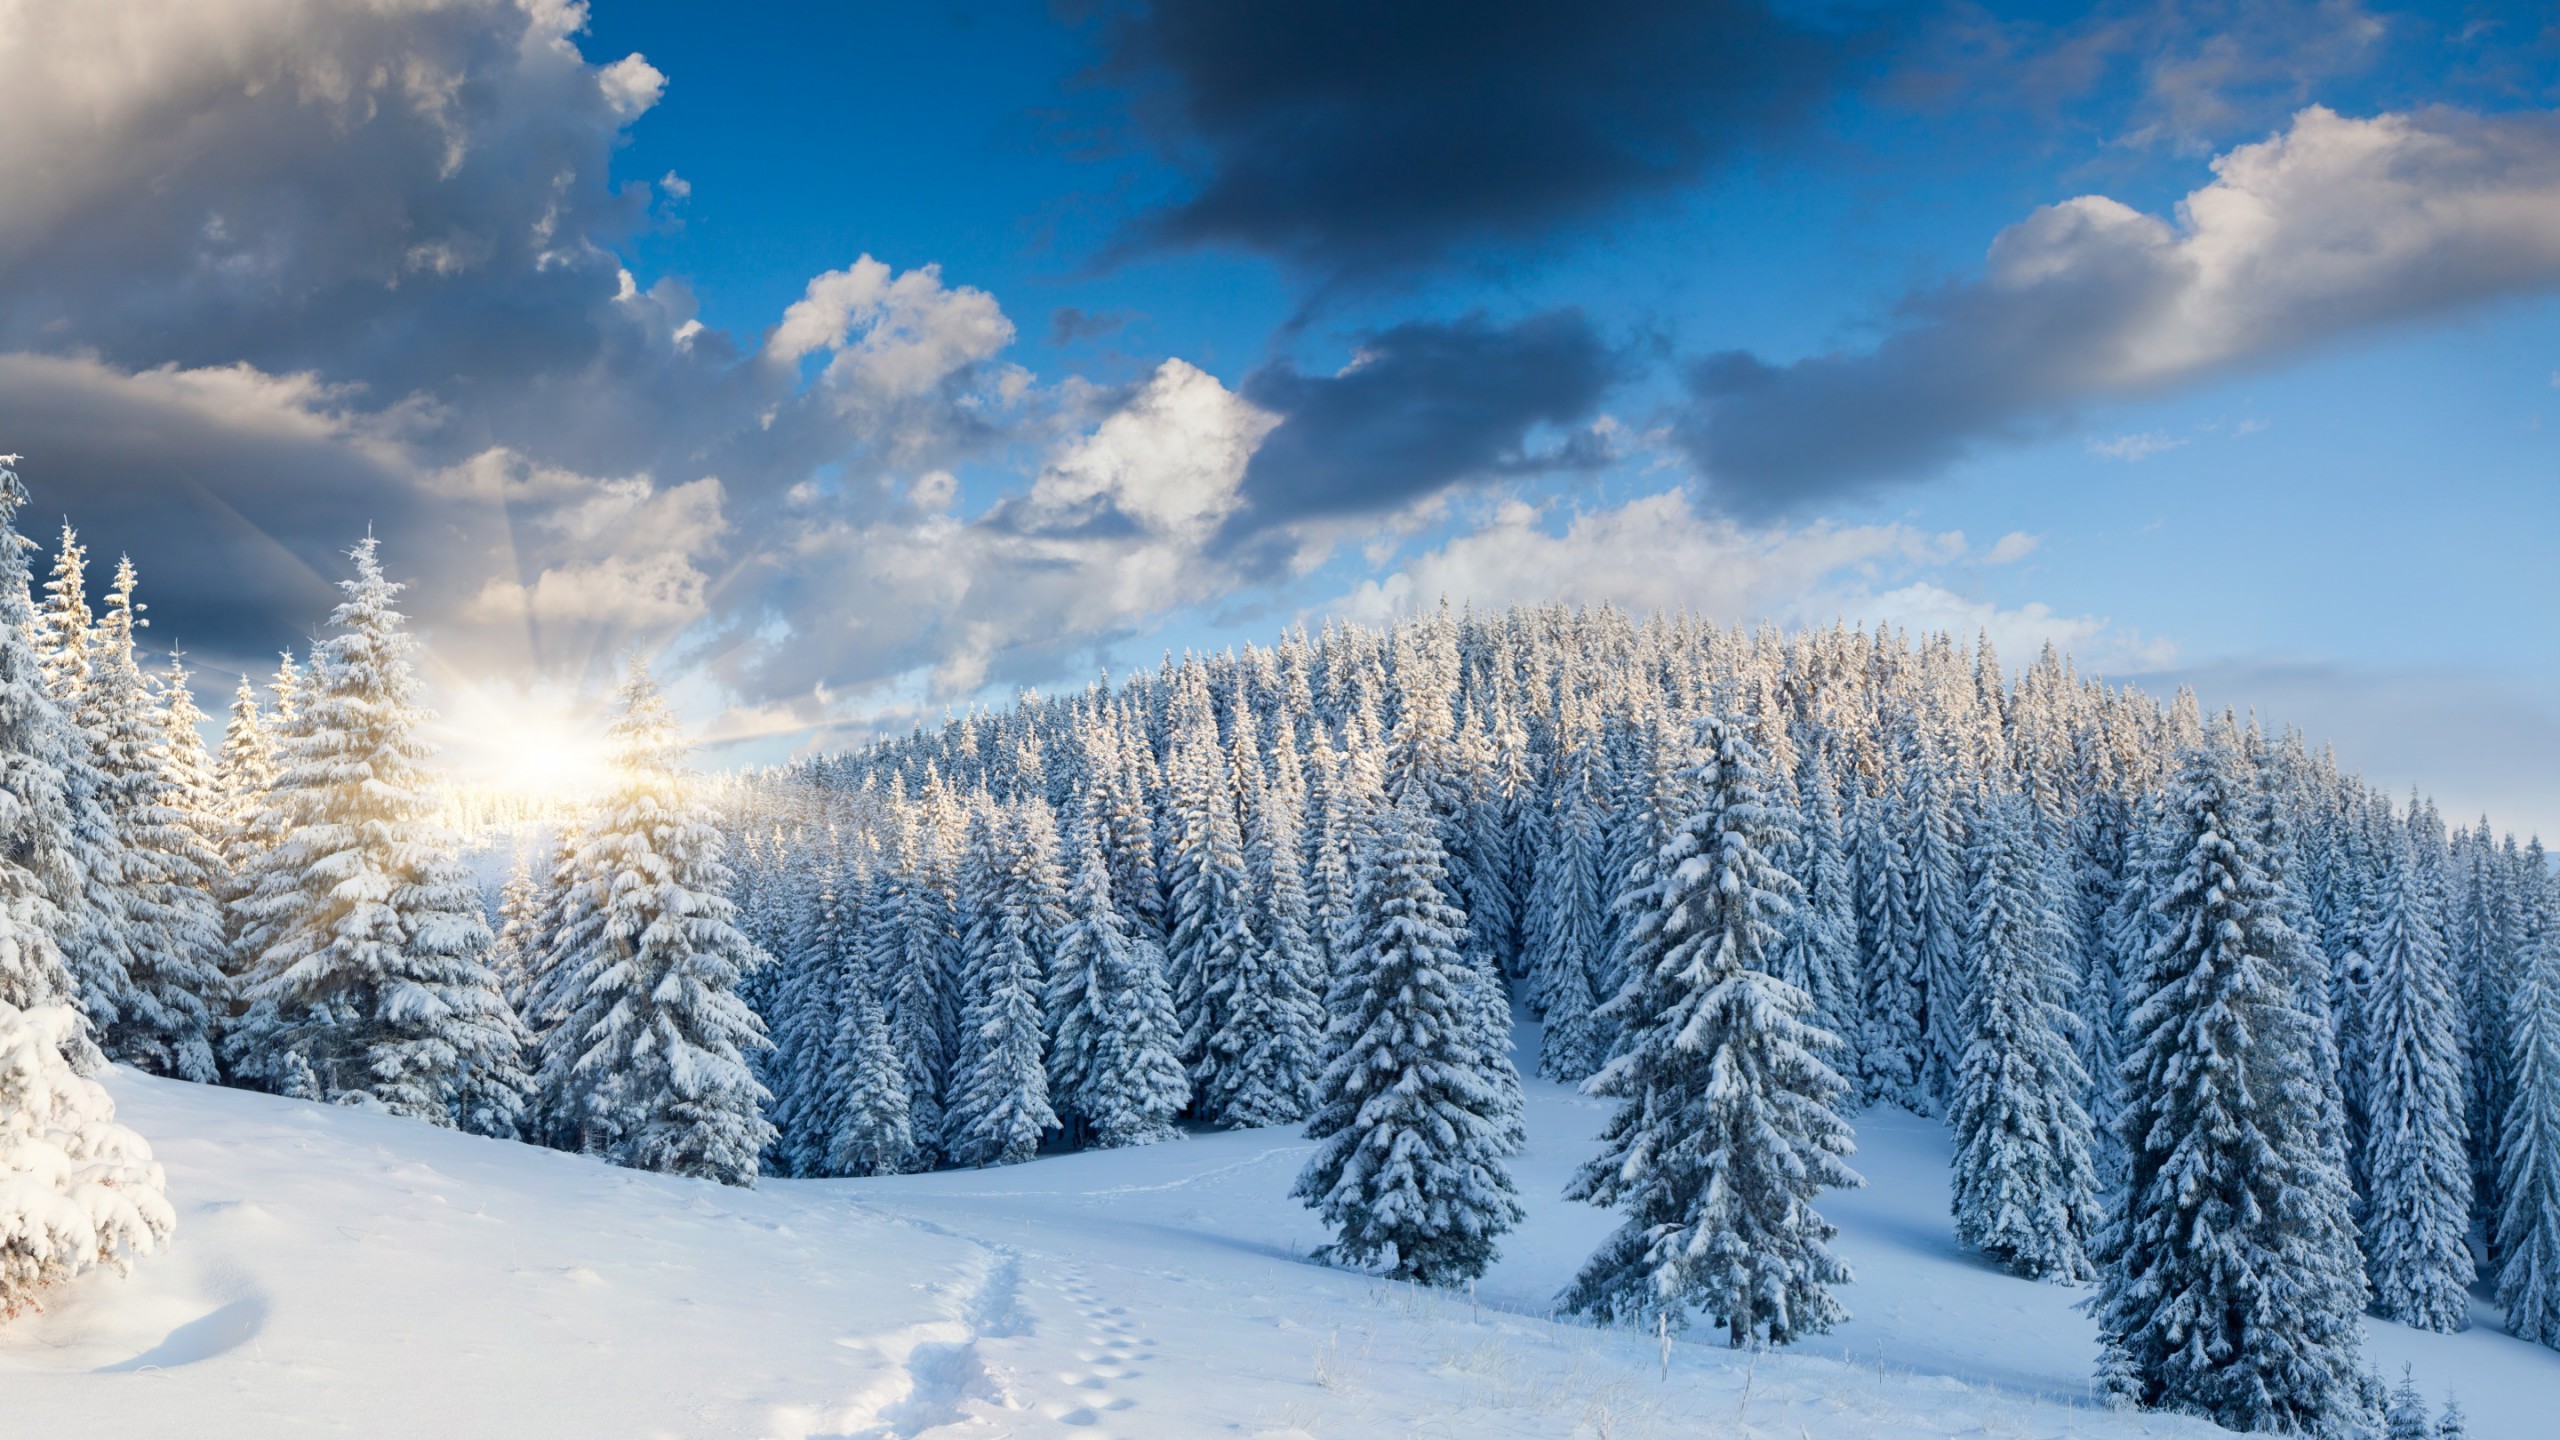 2560x1440 Snow Forest Wallpapers - Wallpaper Cave